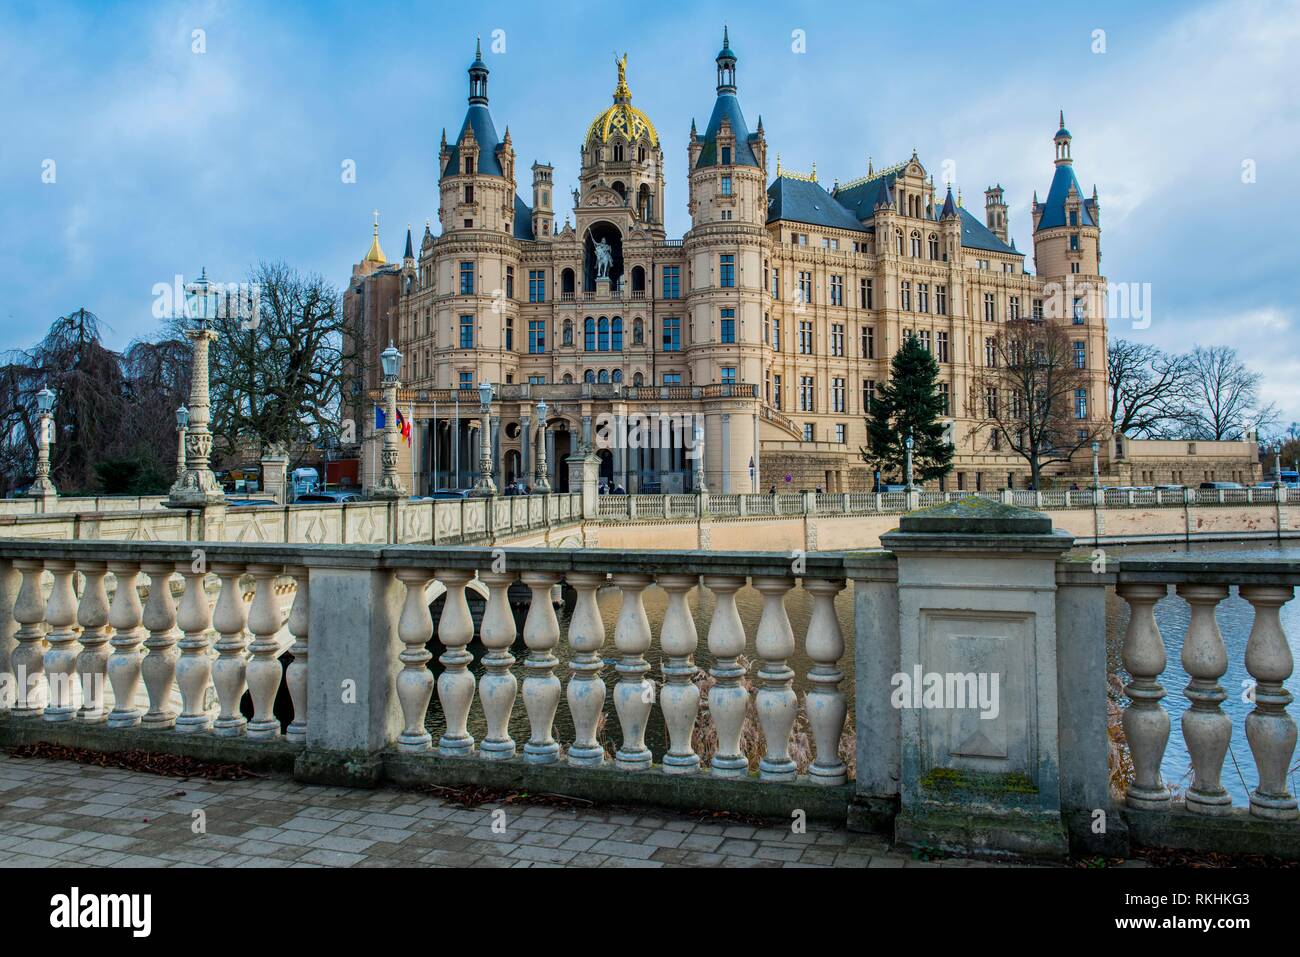 Schwerin Castle, State Parliament of Mecklenburg-Western Pomerania, Schwerin, Mecklenburg-Western Pomerania, Germany Stock Photo